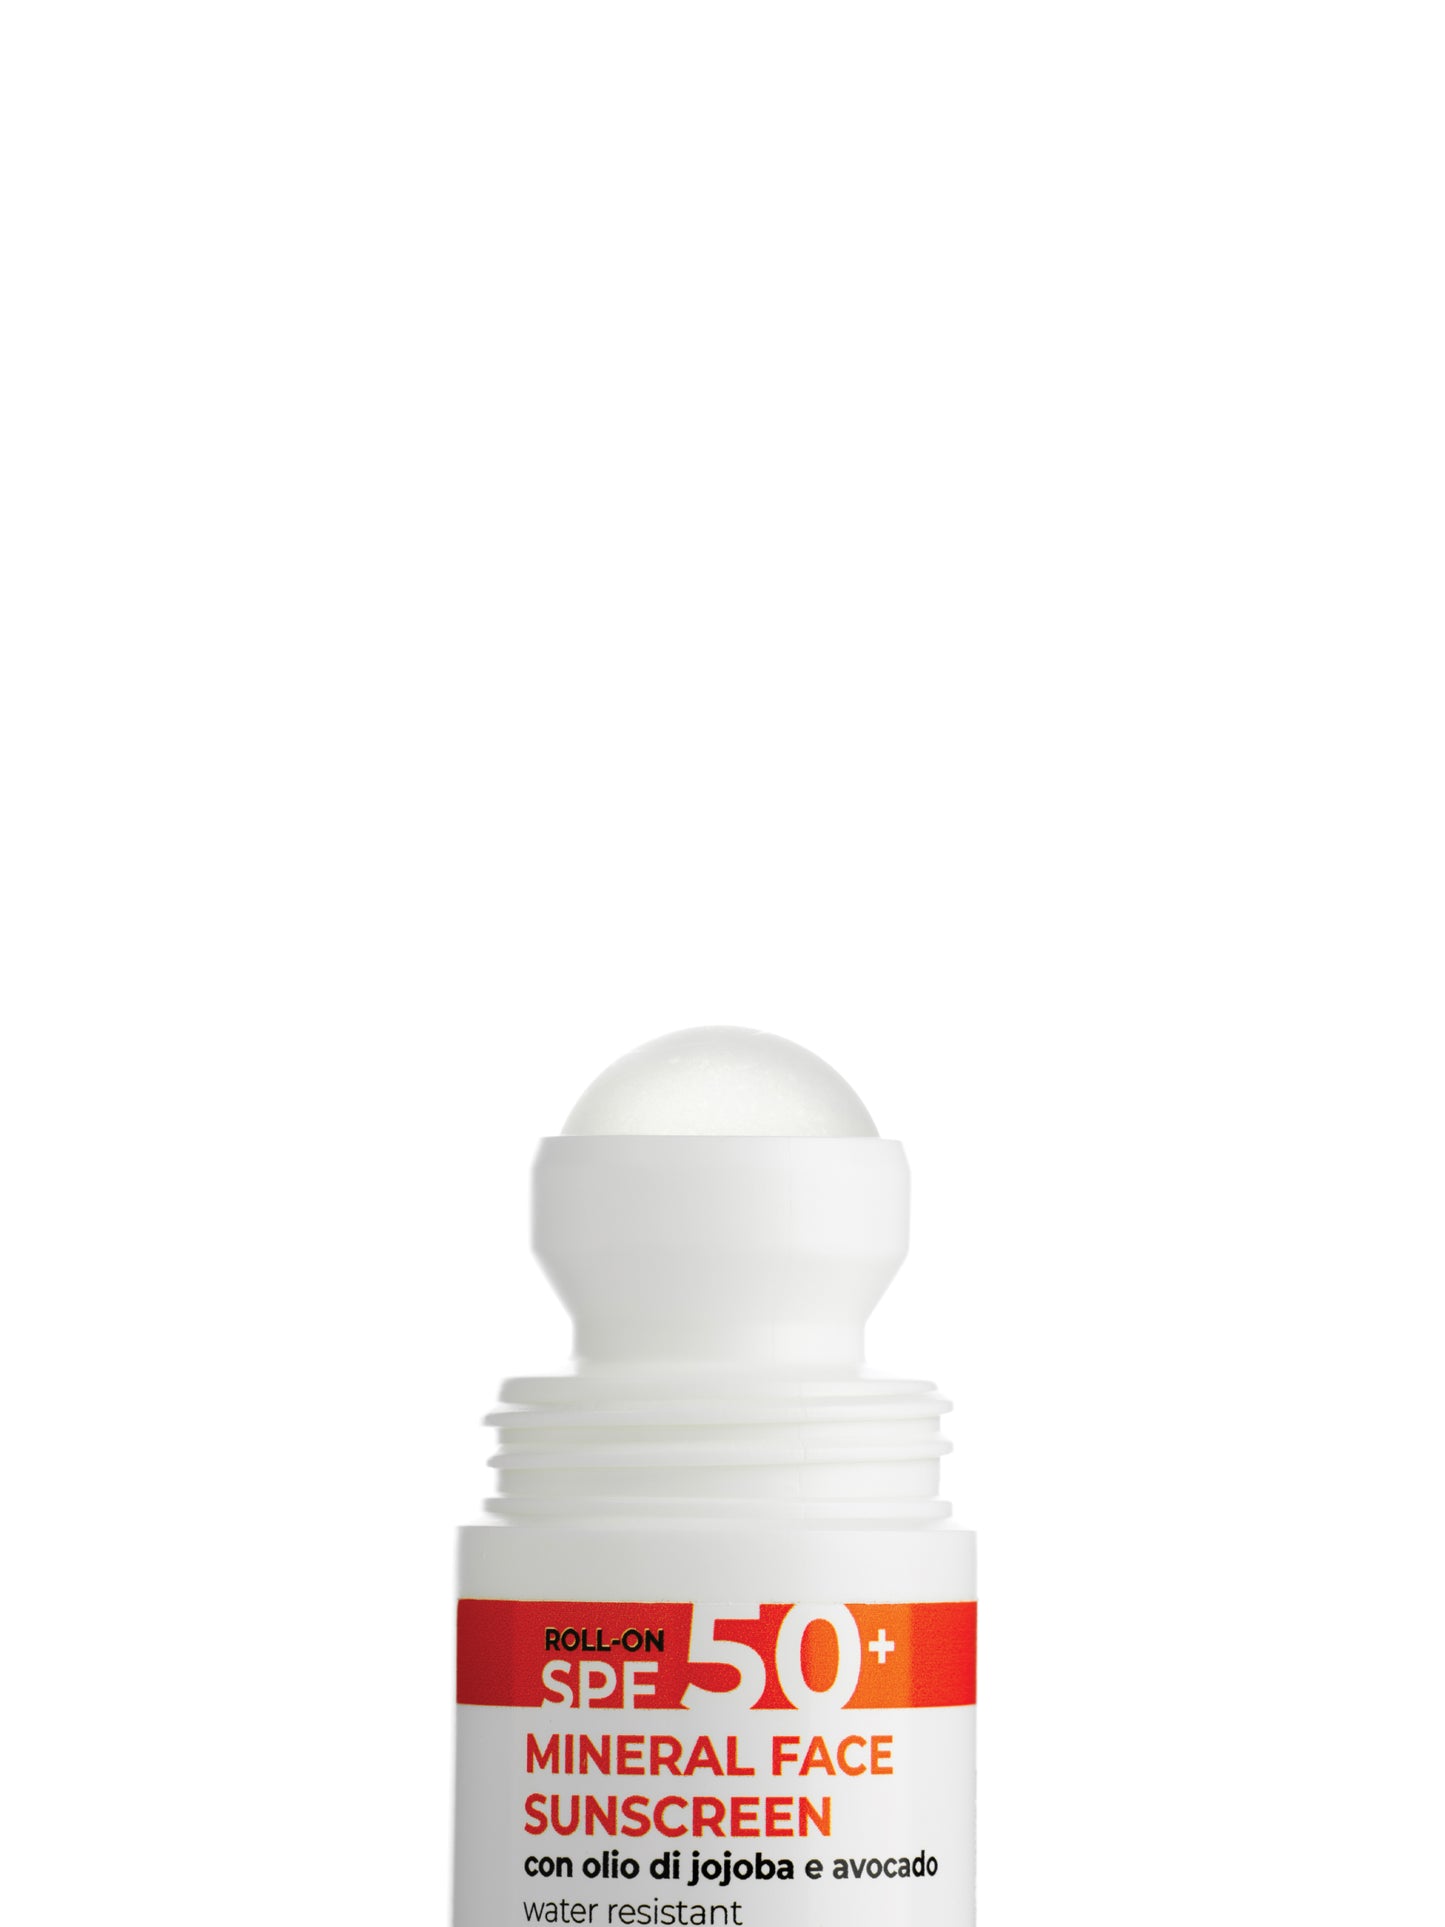 MINERAL FACE SUNSCREEN ROLL ON SPF 30